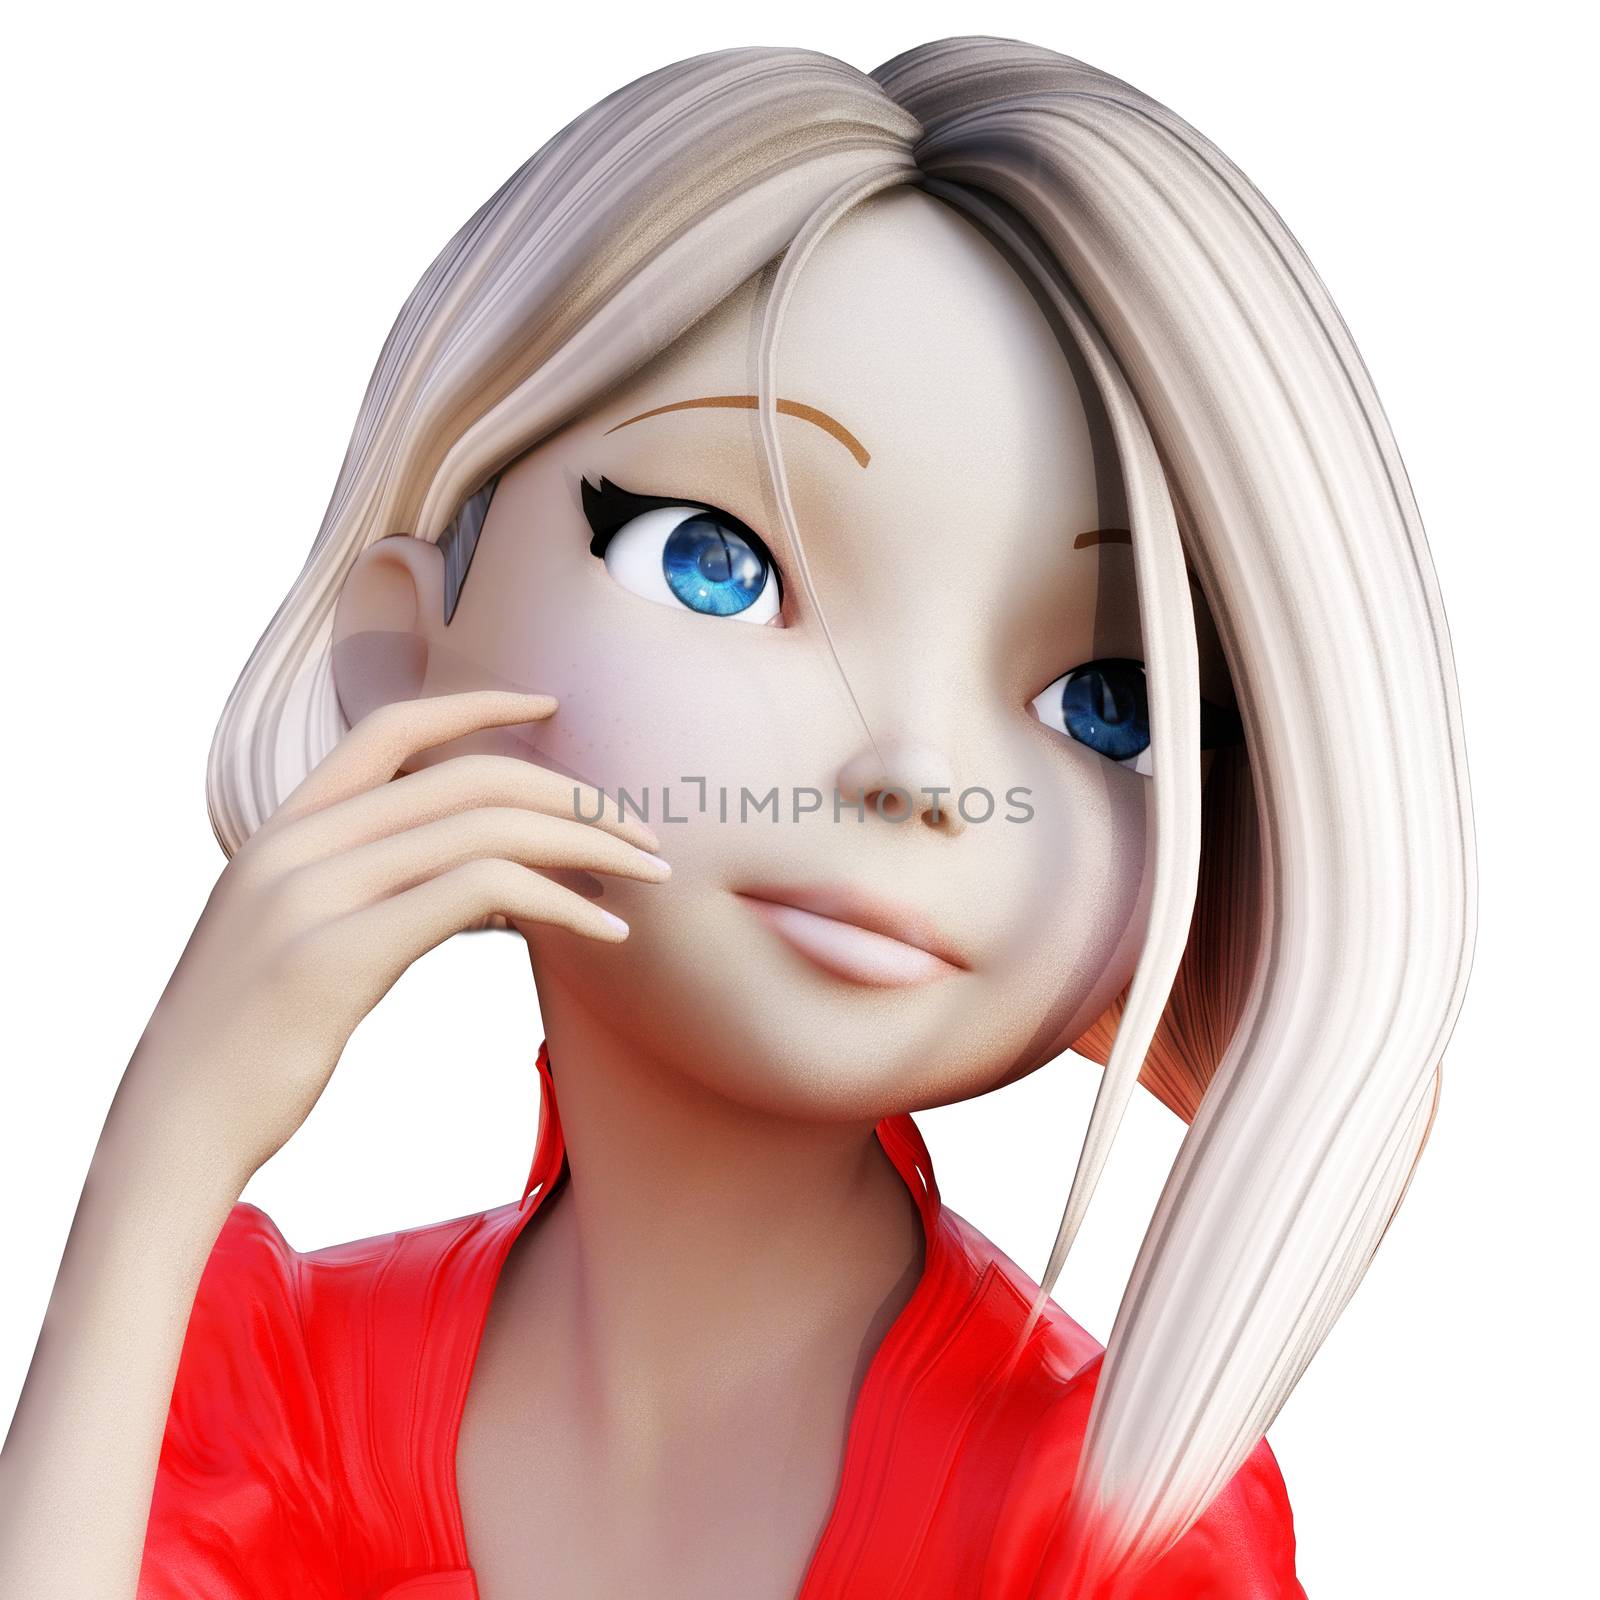 Digital 3D Illustration of a Toon Girl, Cutout on white Background